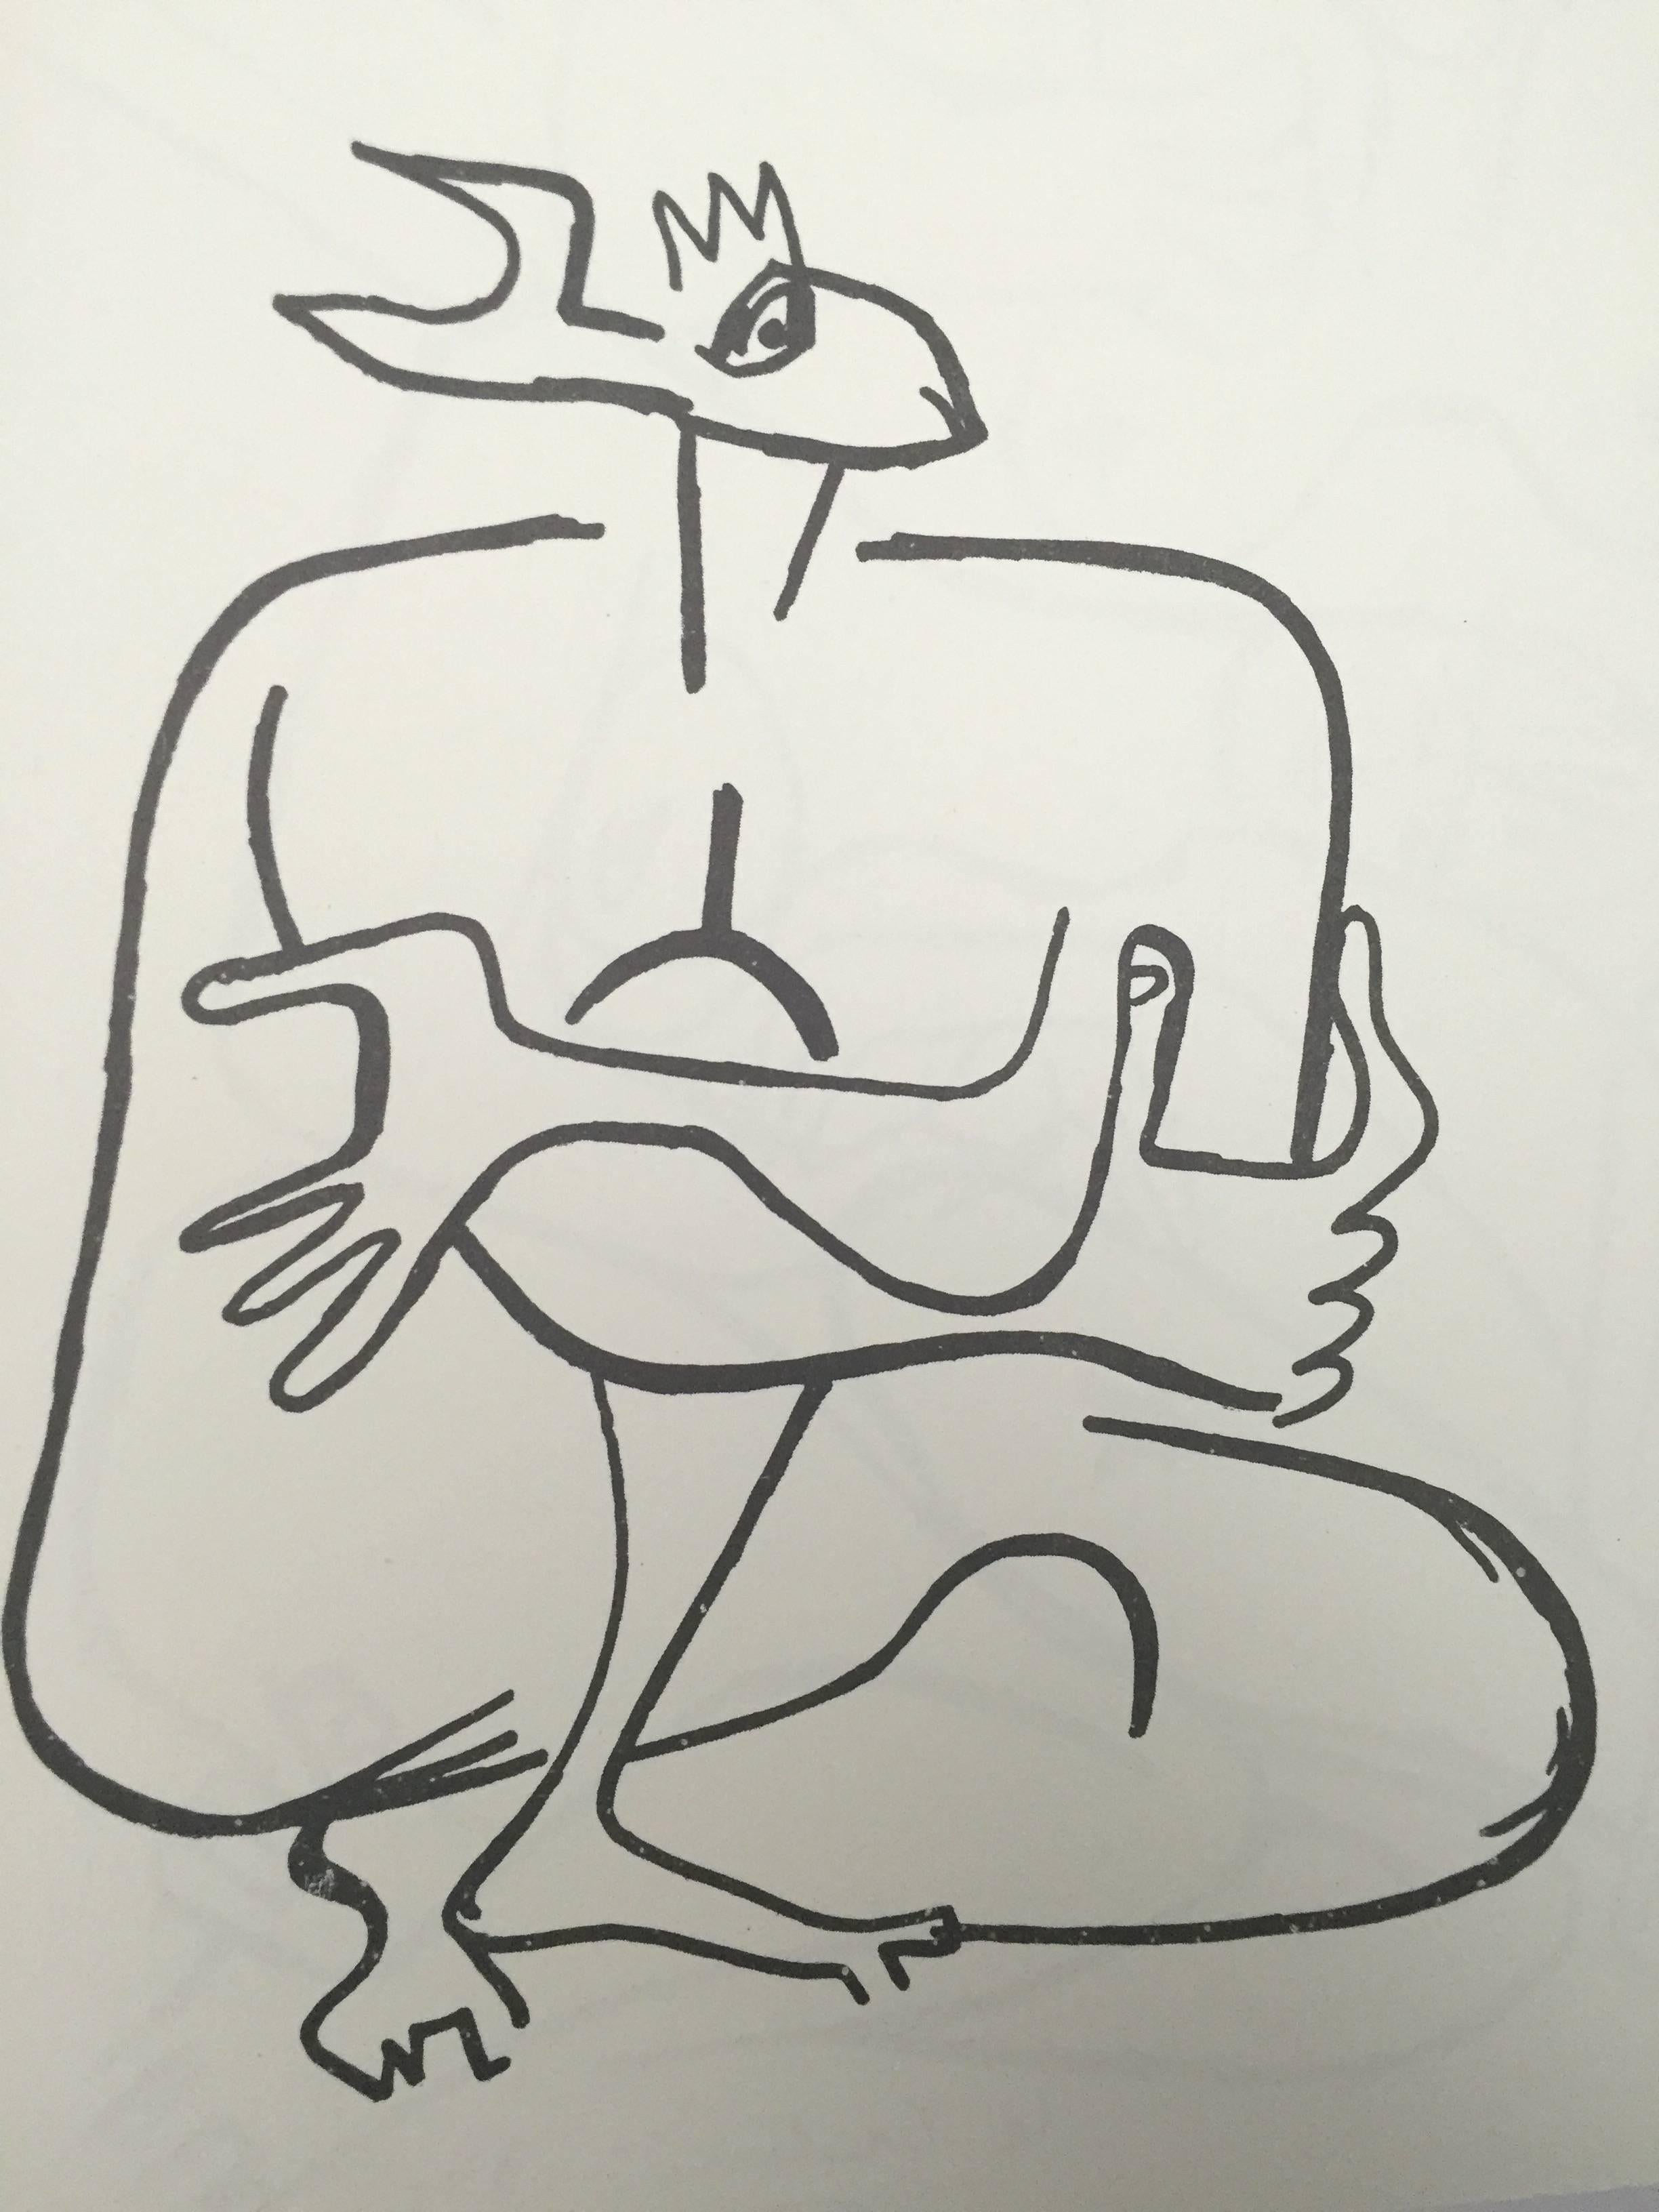 First edition, Éditions Forces Vives, 1968.

A scarce edition of drawings by Le Corbusier, best known for his architectural and furniture designs. The styles vary between more figurative portraiture moving in to the abstract, with clear links in